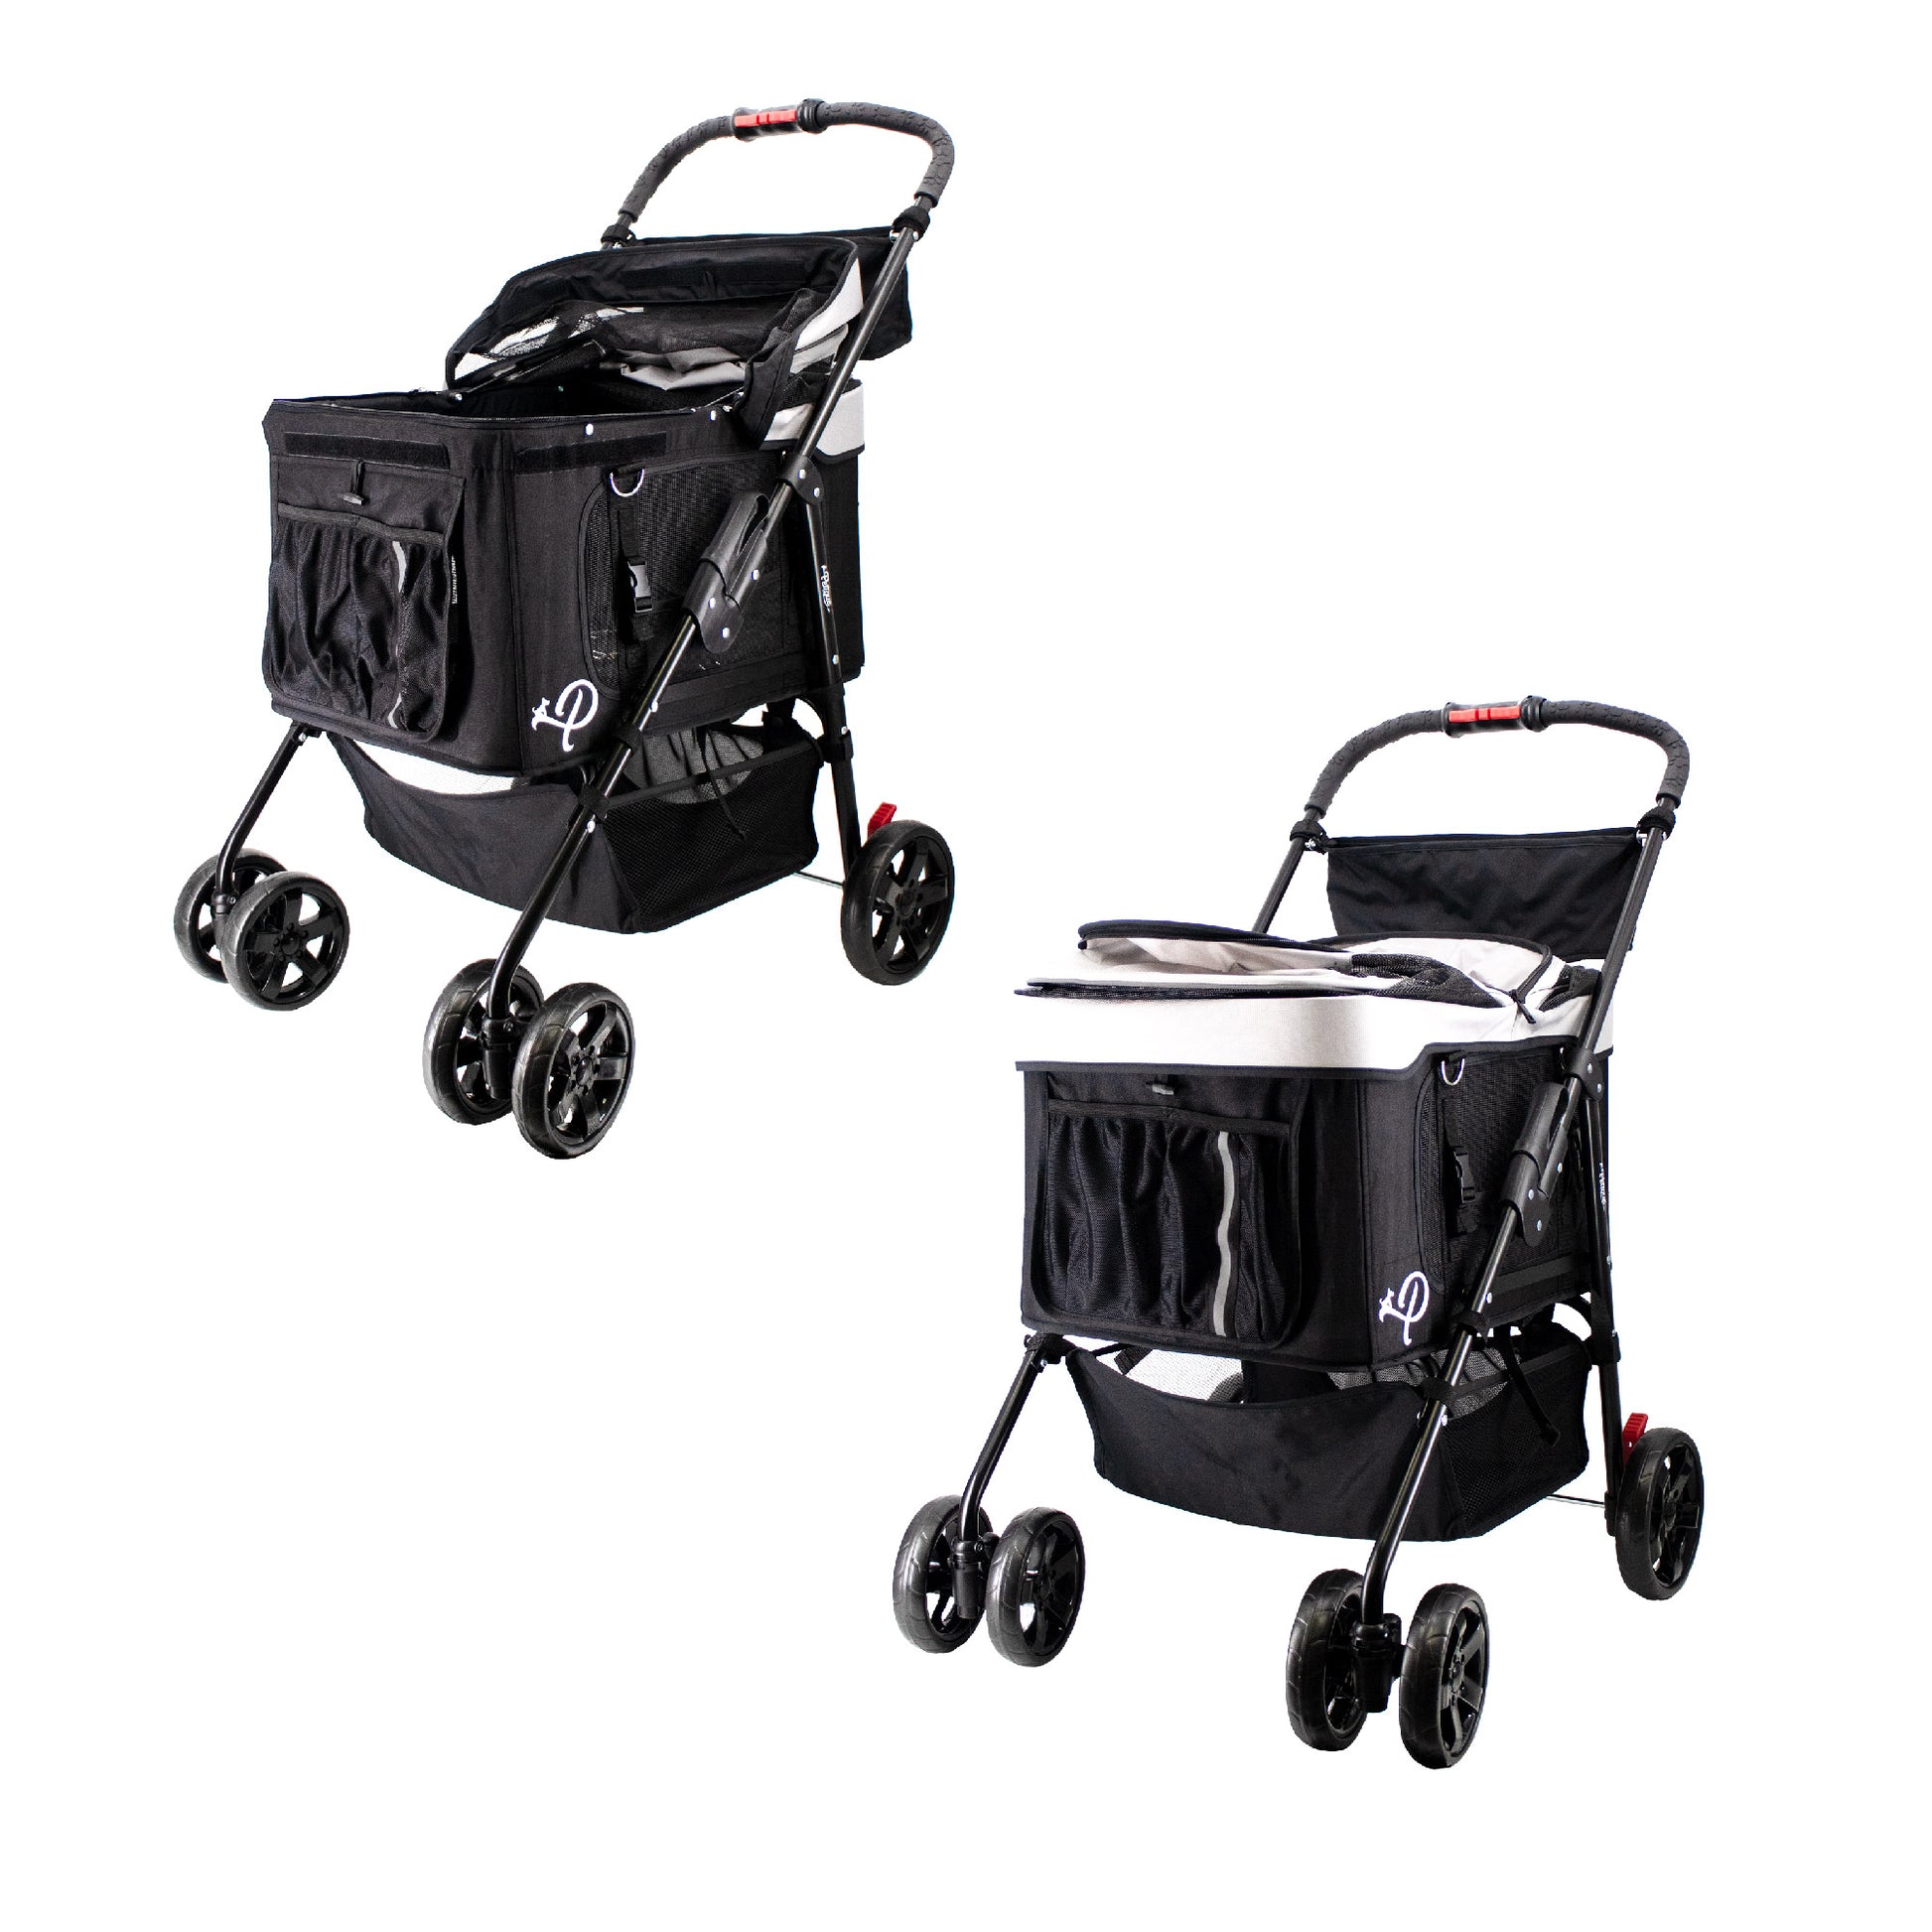 black pet stroller with canopy openings